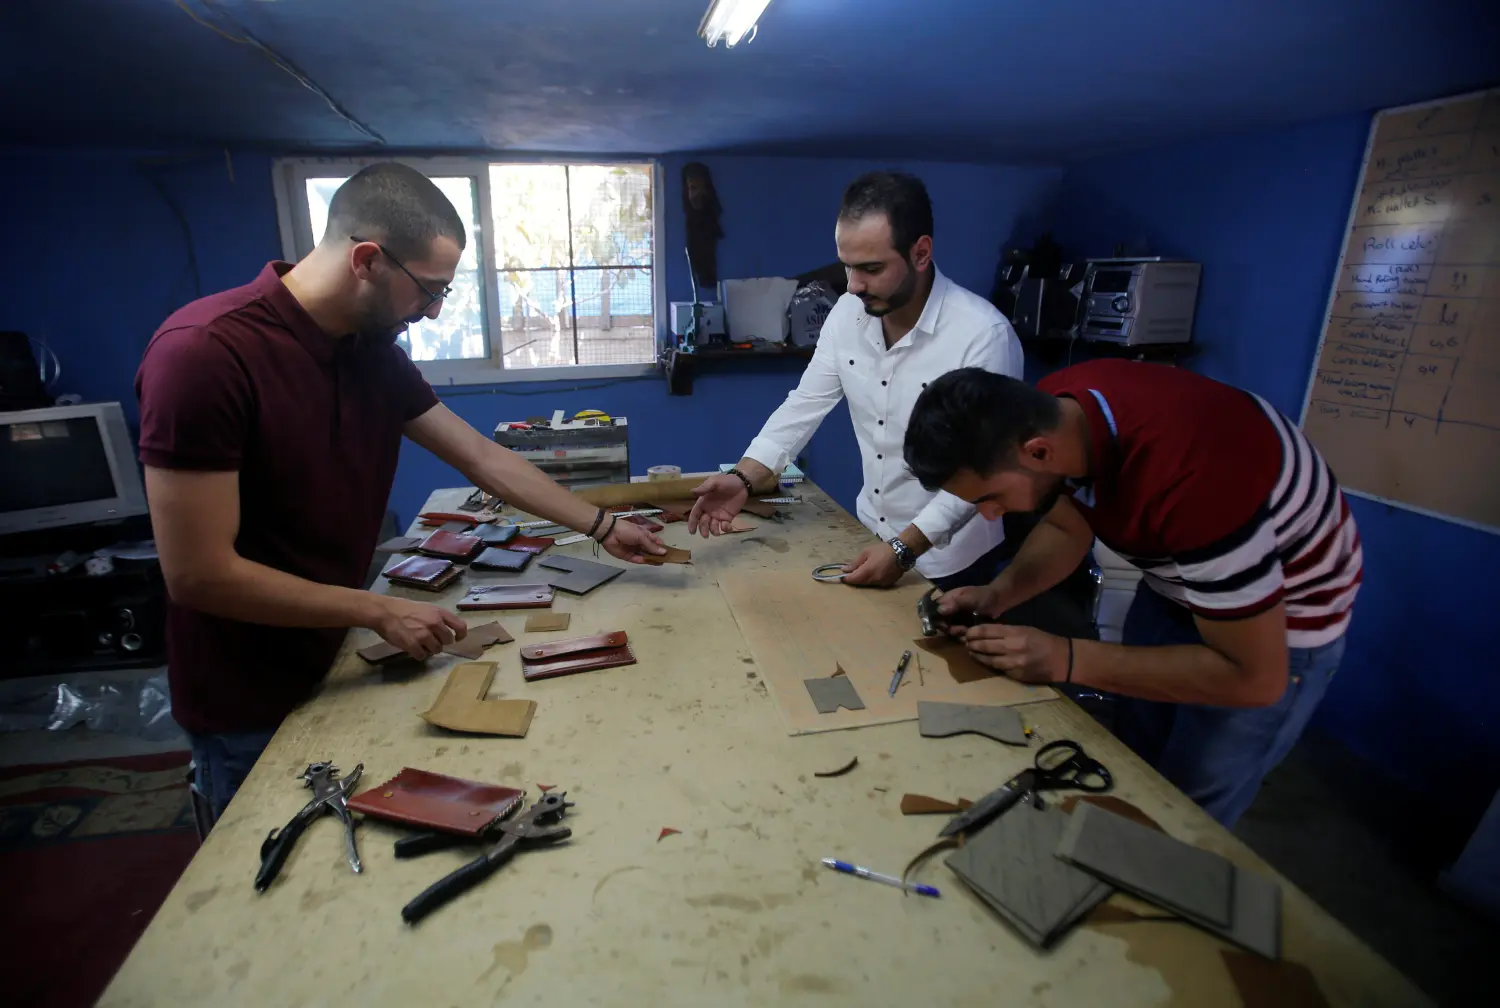 Palestinian men make leather products for sale in a factory in the West Bank town of Dura, south of Hebron July 2, 2017. Picture taken July 2, 2017. REUTERS/Mussa Qawasma -